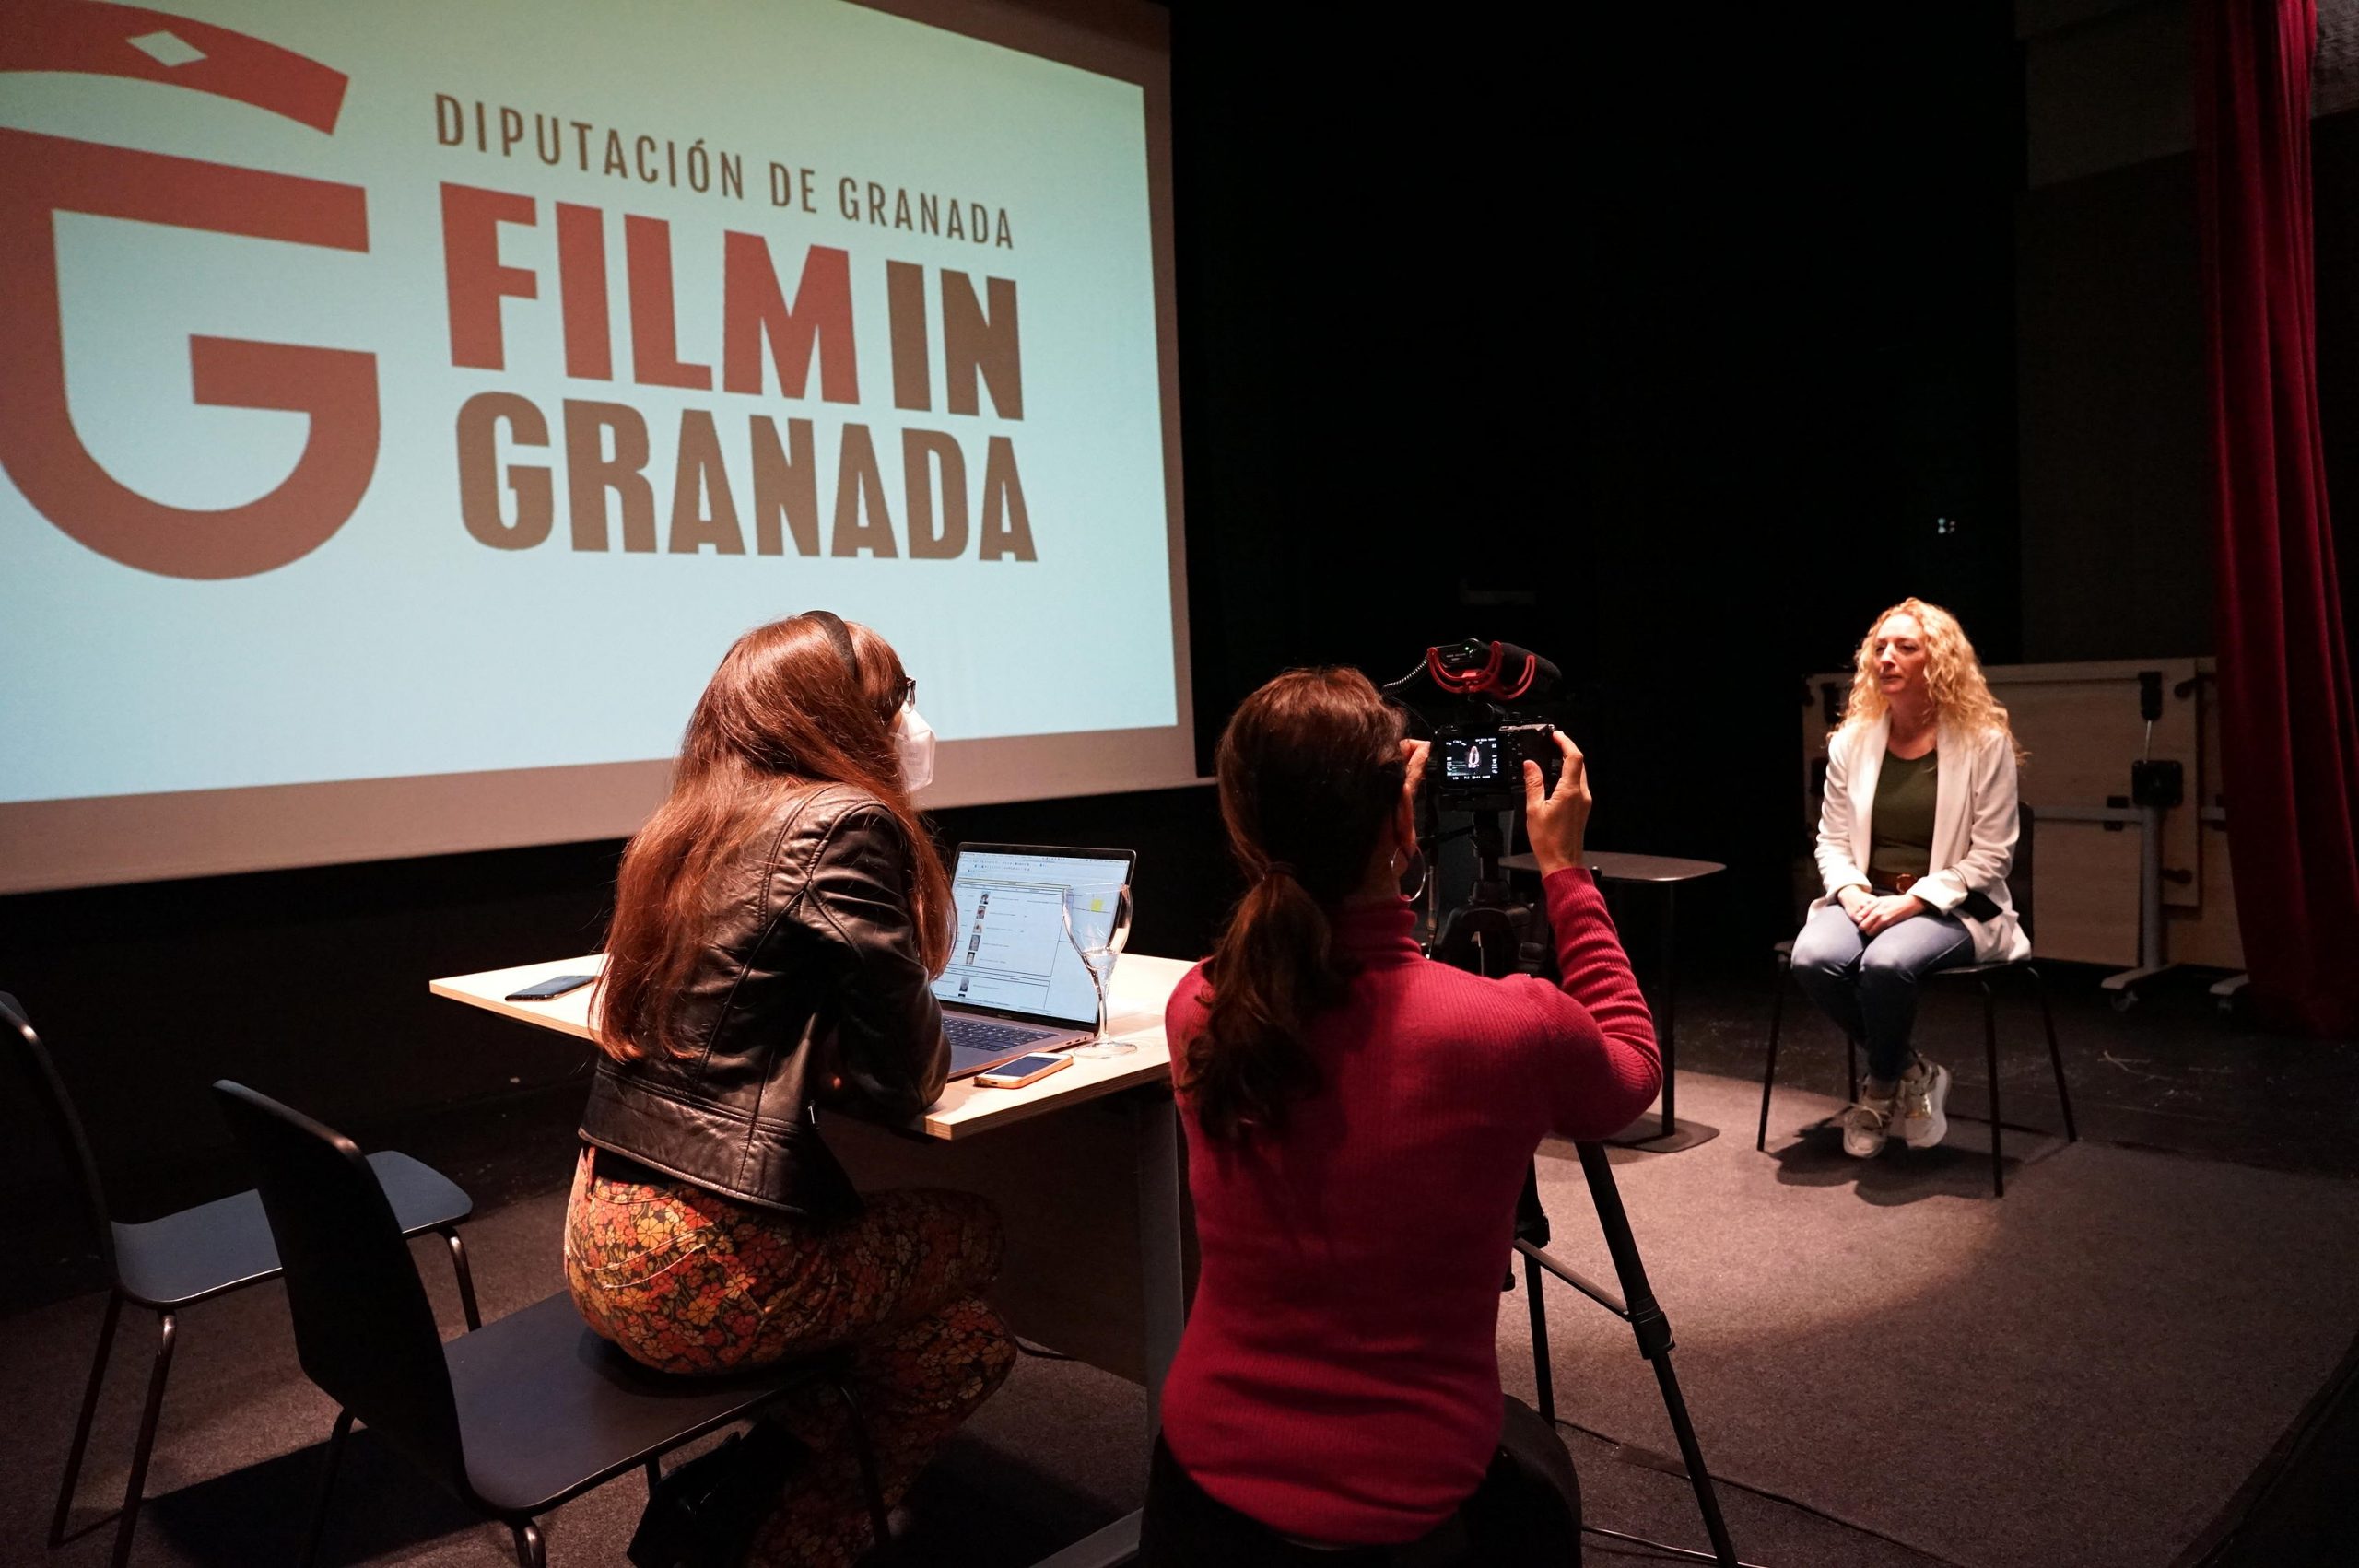 Film in Granada is working on three films and a series that will start shooting in May